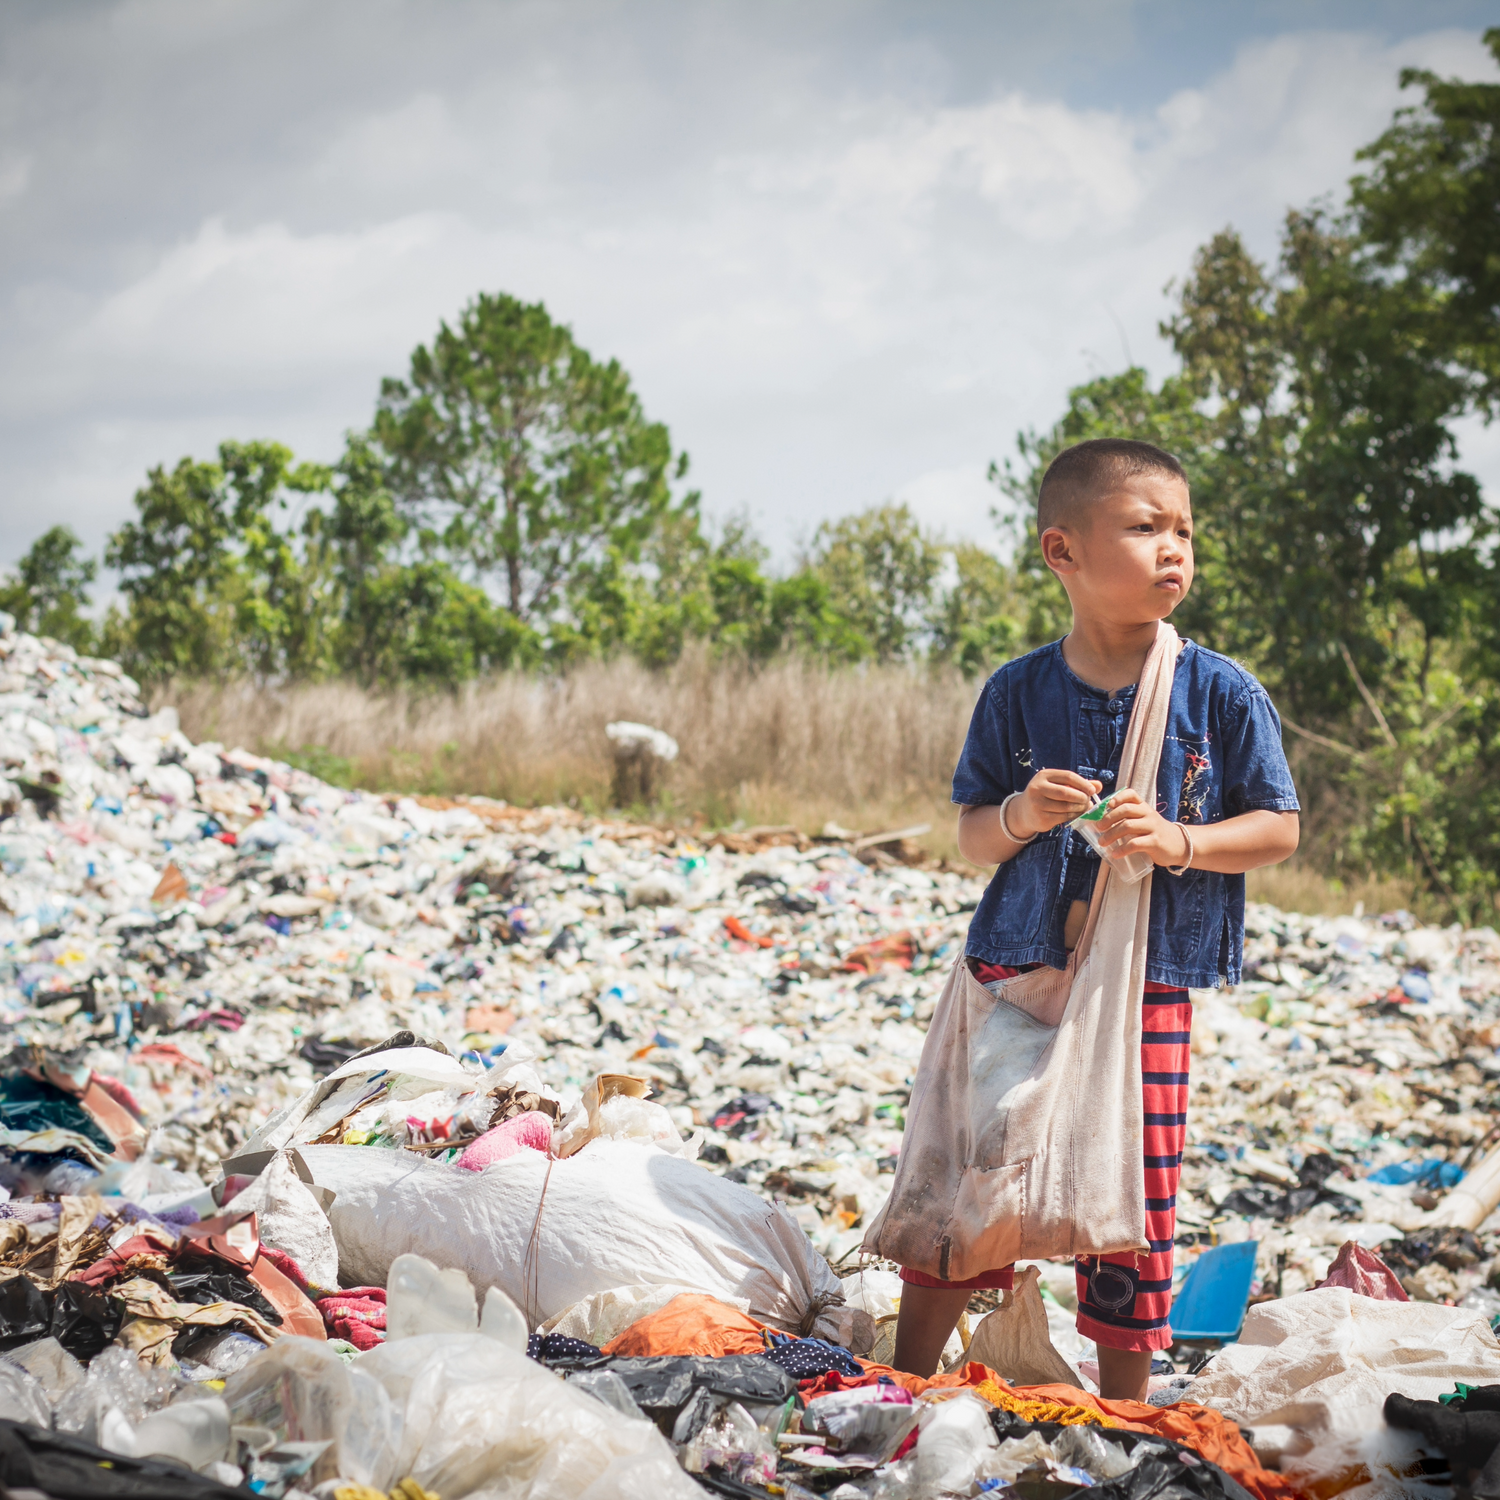 A young boy standing on a pile of accumulated plastic film and plastic pollution in his environment looking sad.